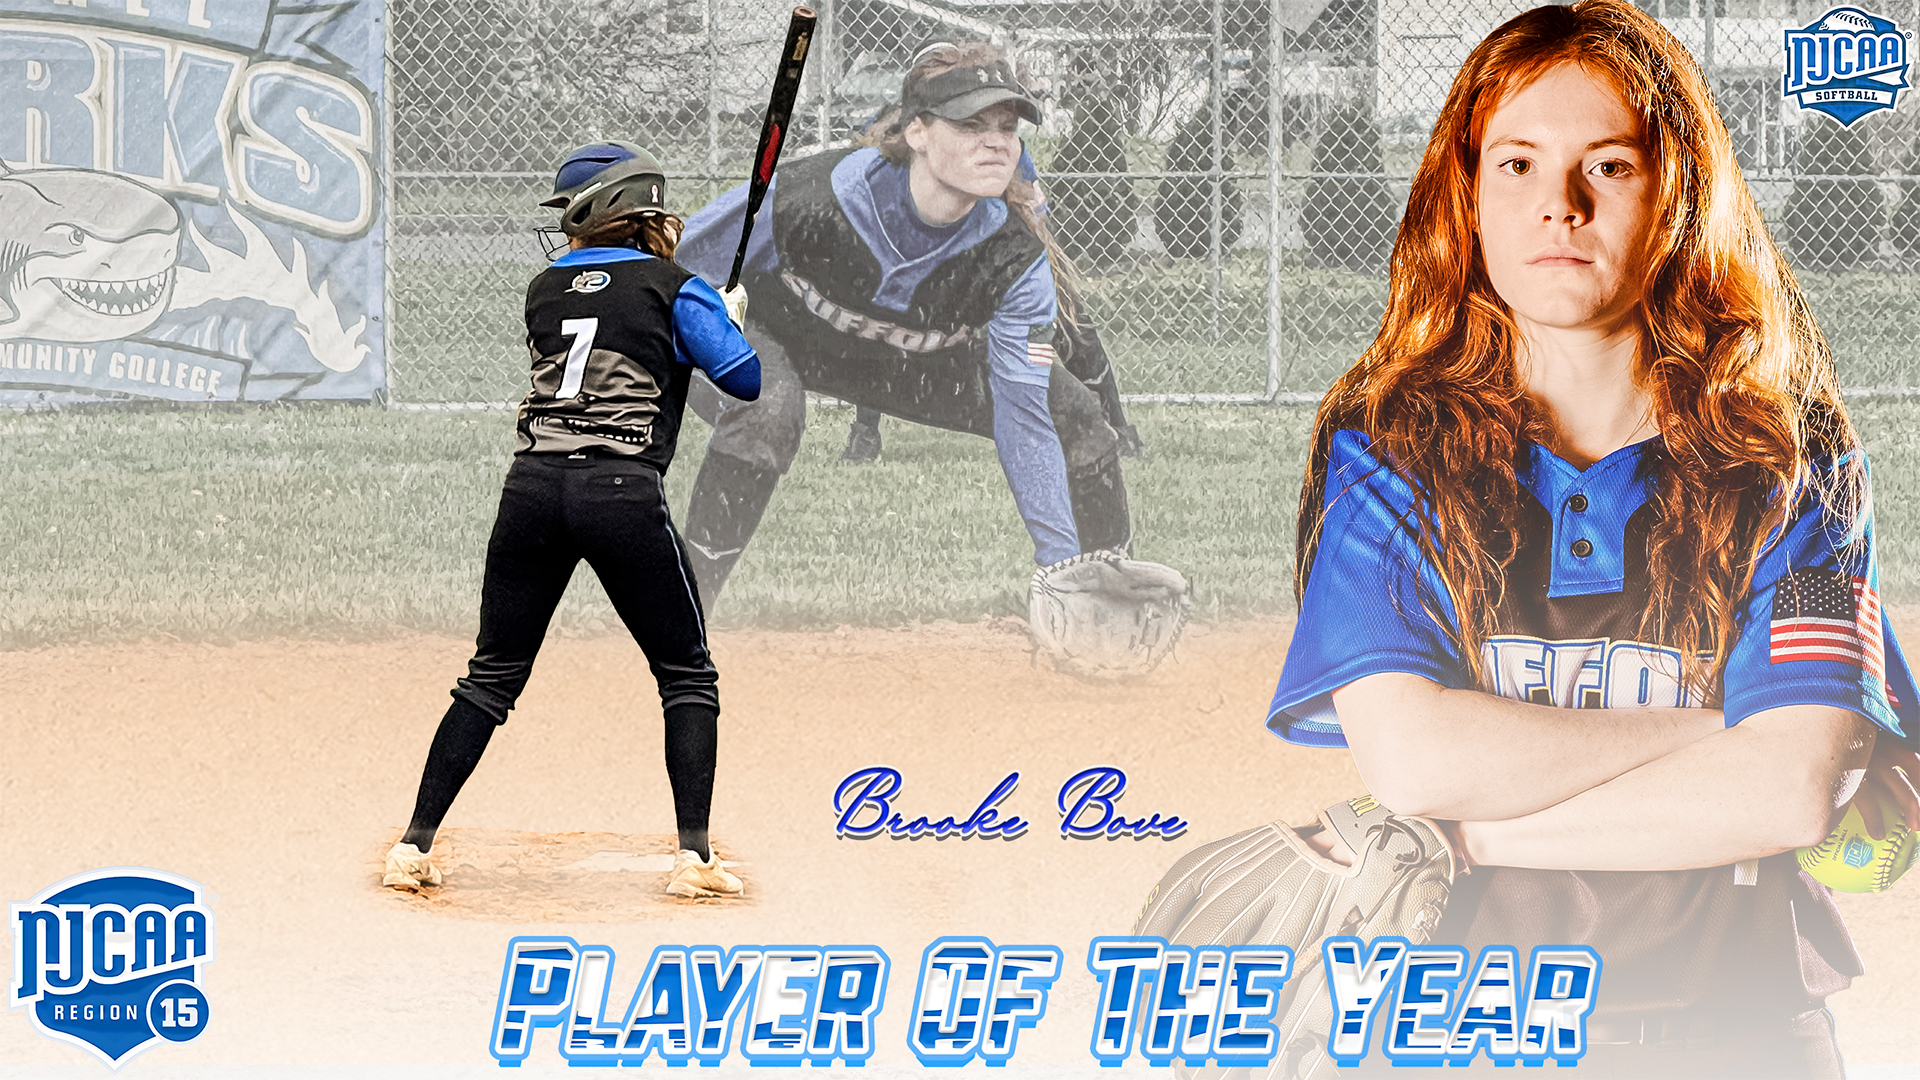 Suffolk Community College's Brooke Bove Receives 2024 Region XV Player Of The Year Accolades